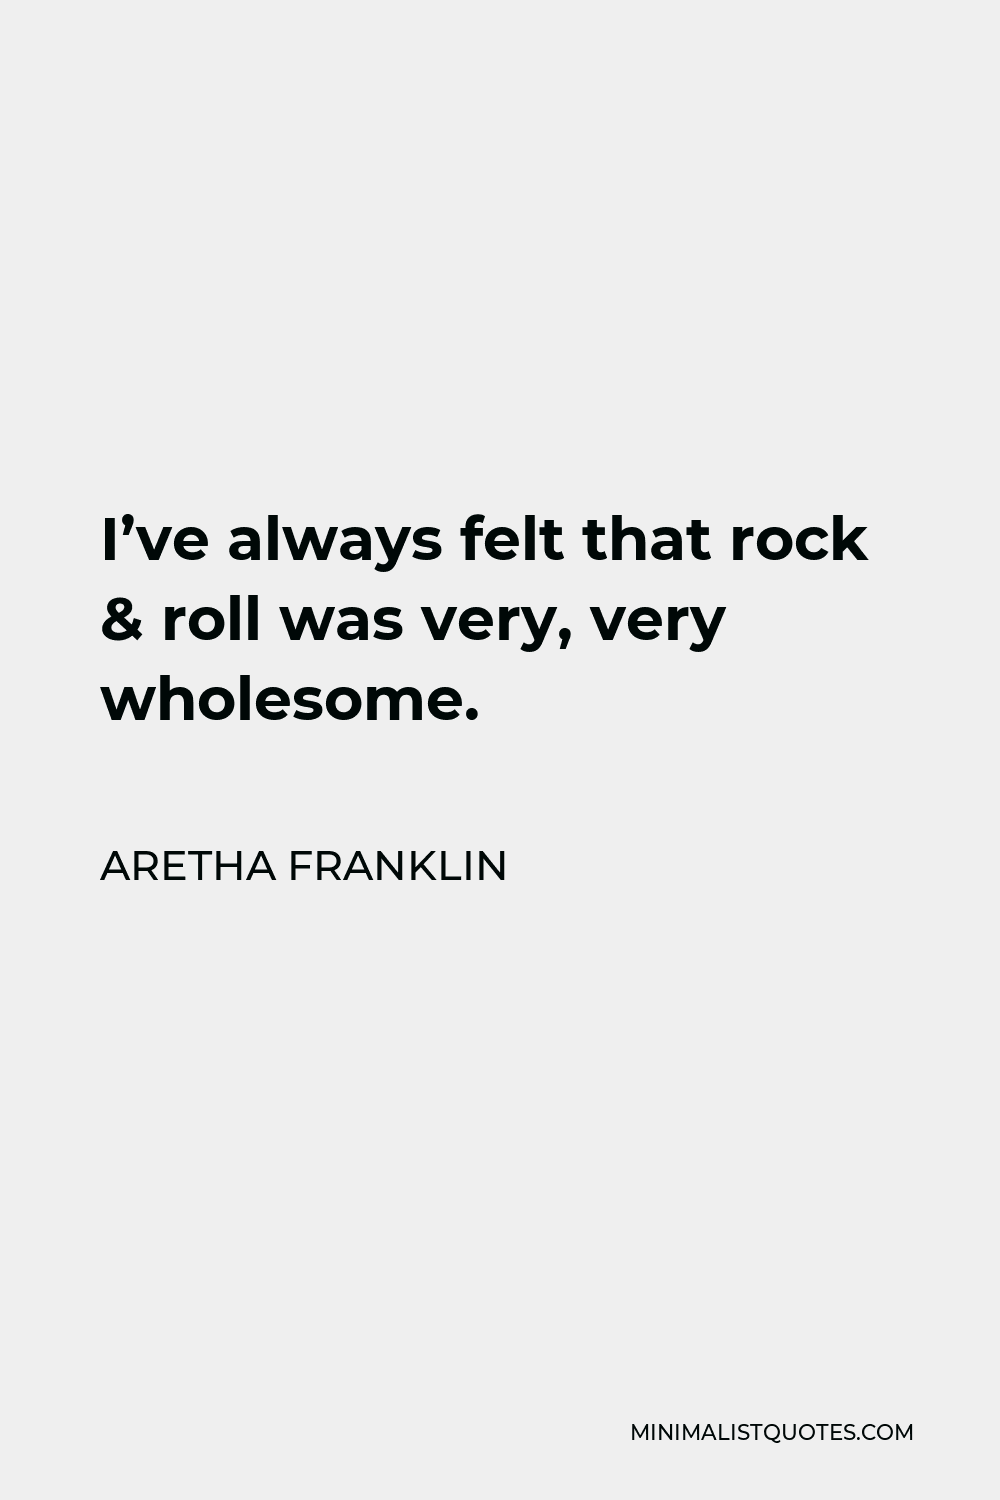 Aretha Franklin Quote - I’ve always felt that rock & roll was very, very wholesome.